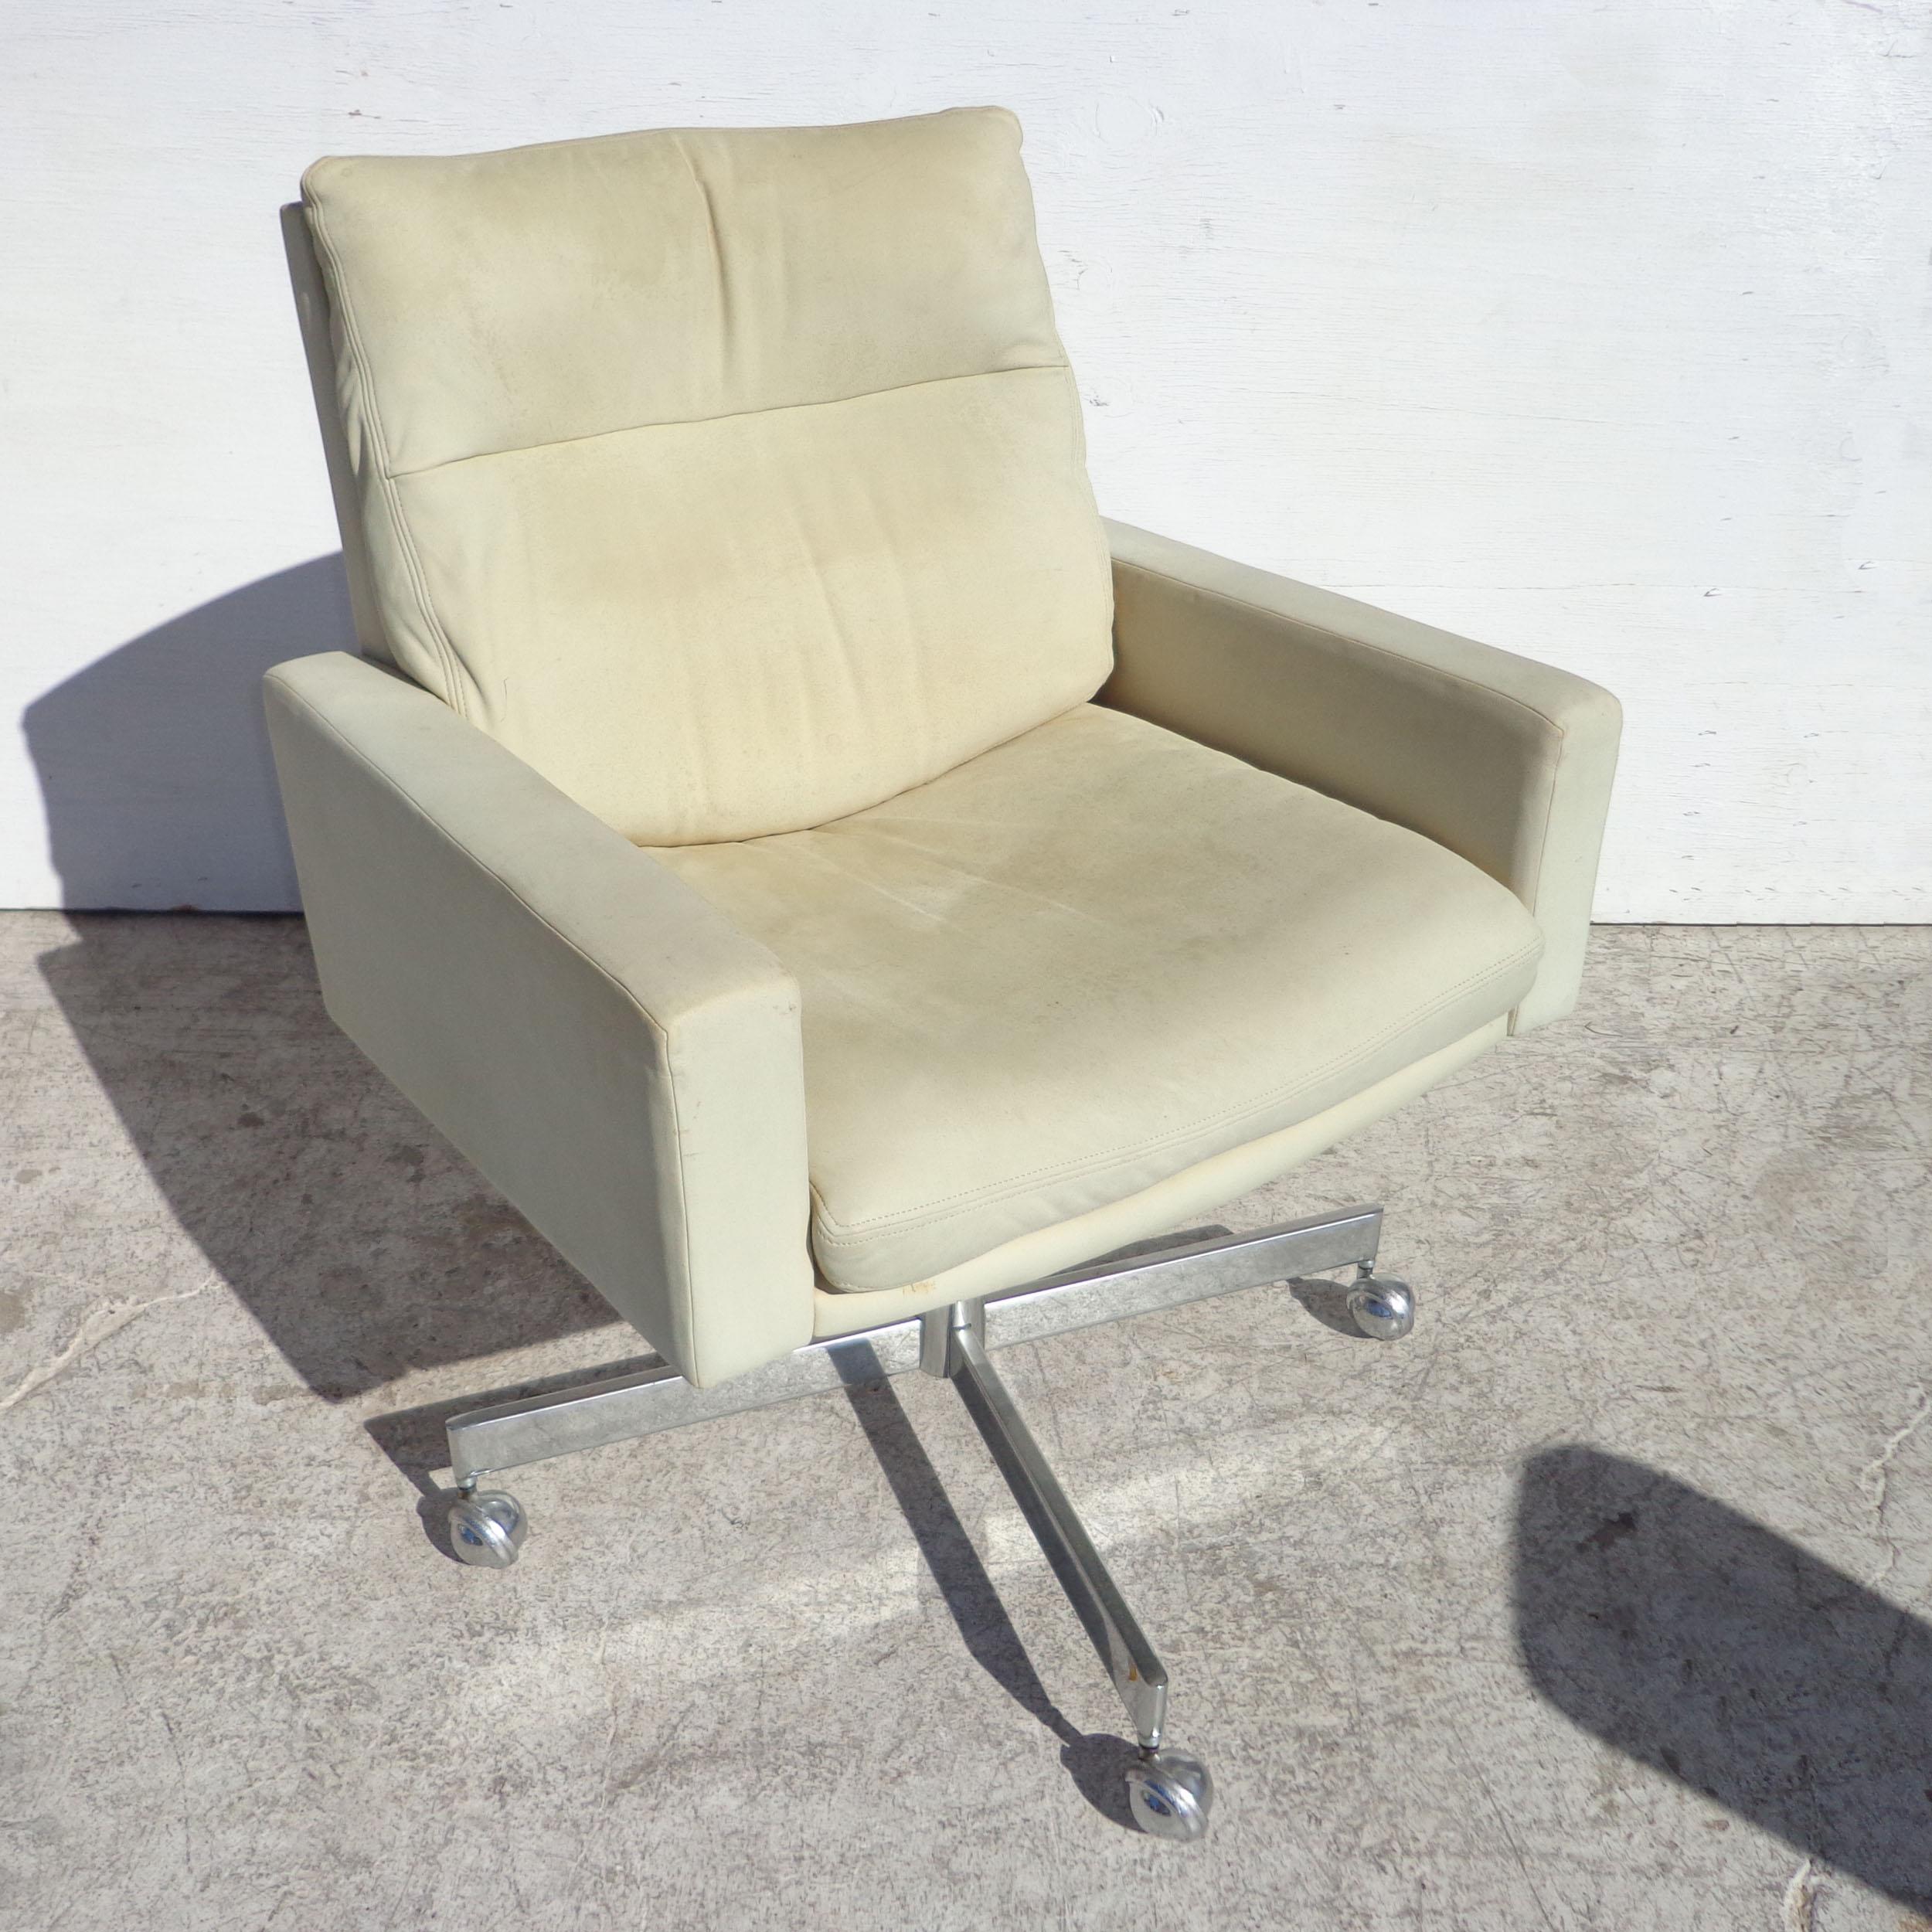 Stendig desk chair by Robert Haussman for deSede

Cream suede with polished chrome base and castors.


Measures: 28.25W x 25